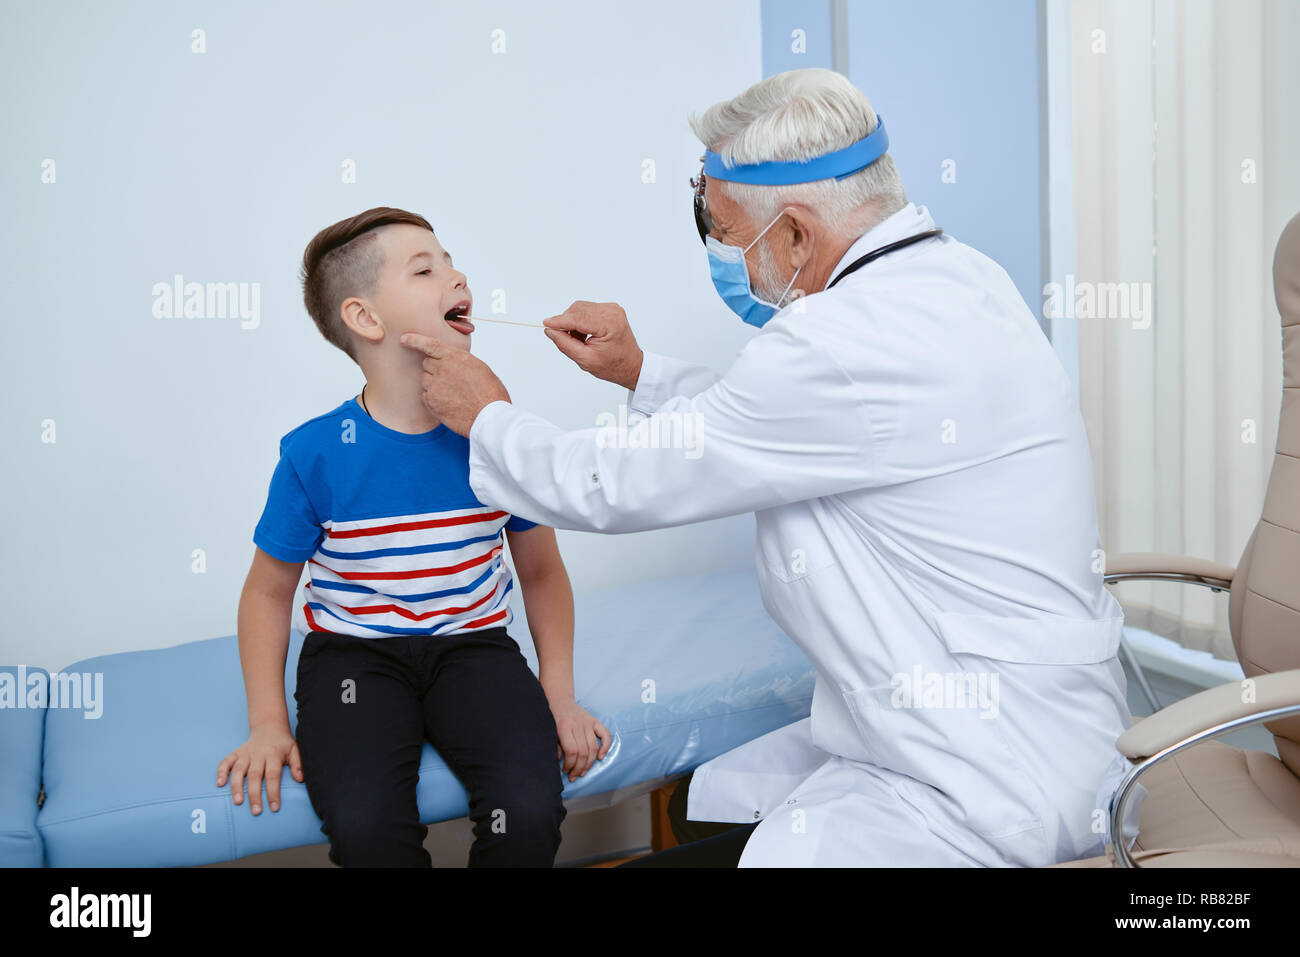 Portrait of doctor in uniform and mask working with little patient in hospital. Professional doctor helping providaing medical examination for ill boy. Concept of health care. Stock Photo